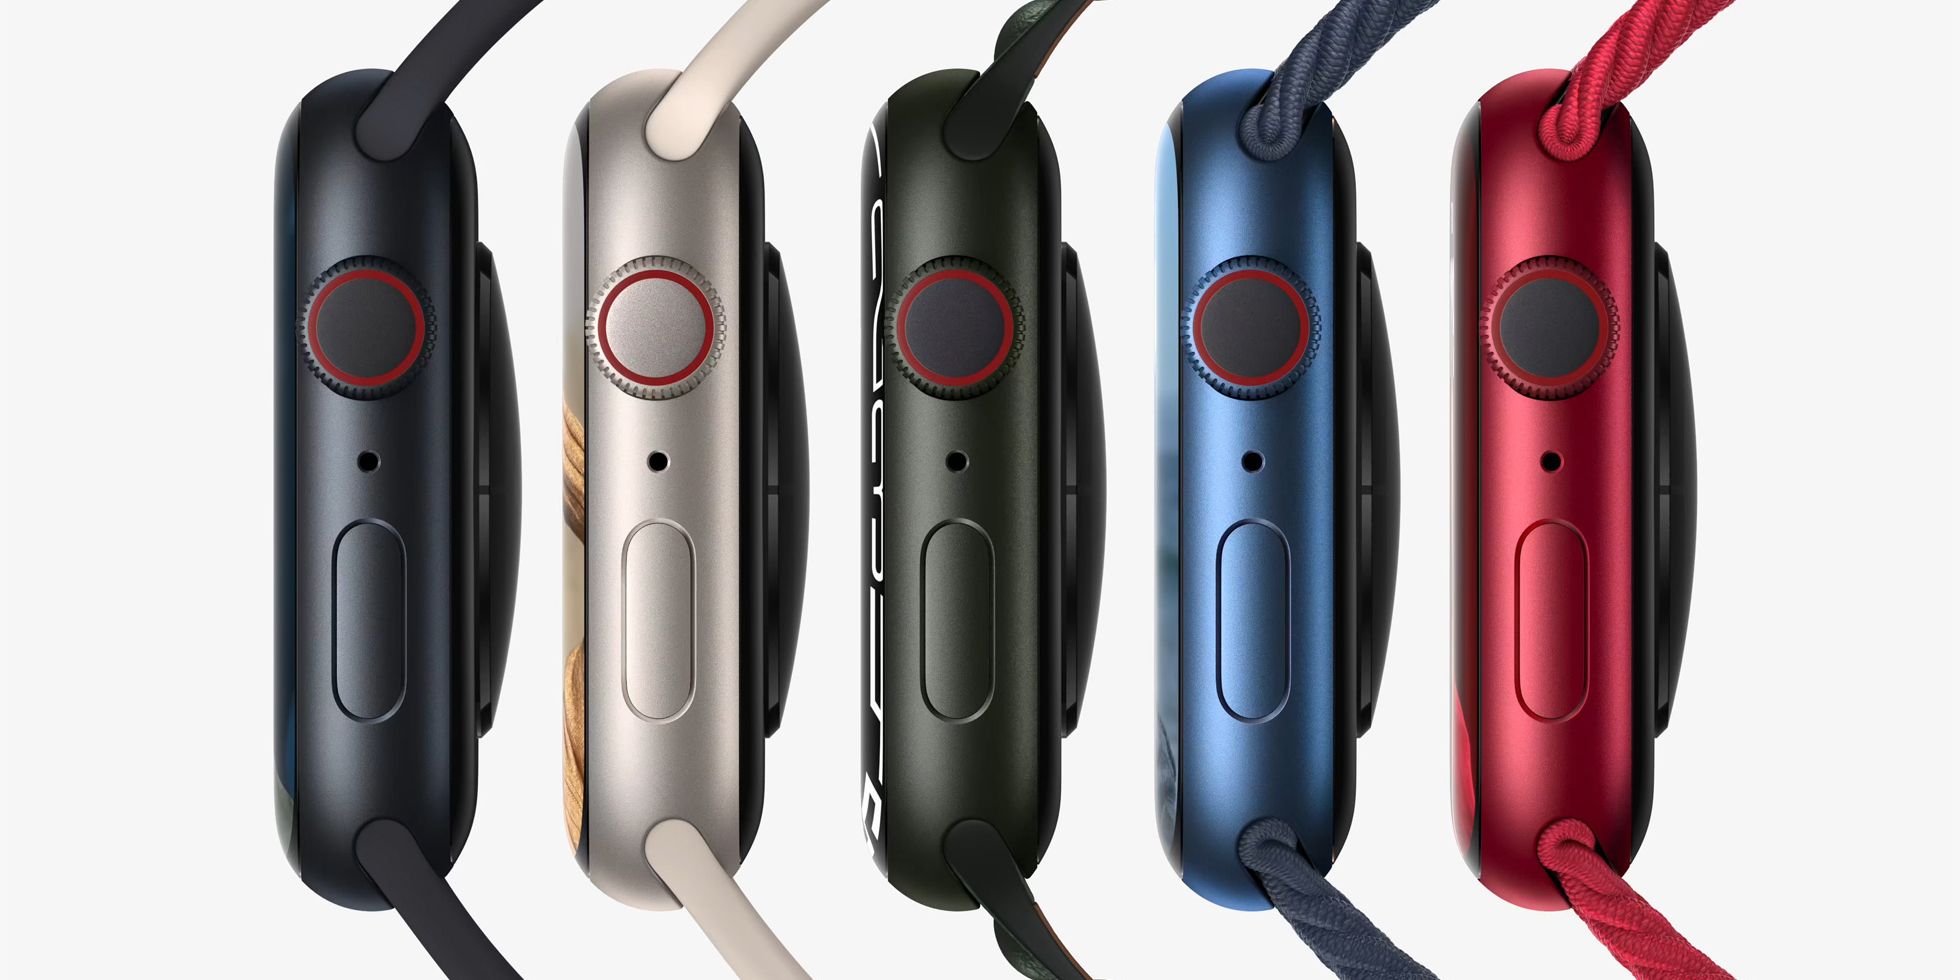 All colors for the aluminum Apple Watch Series 7